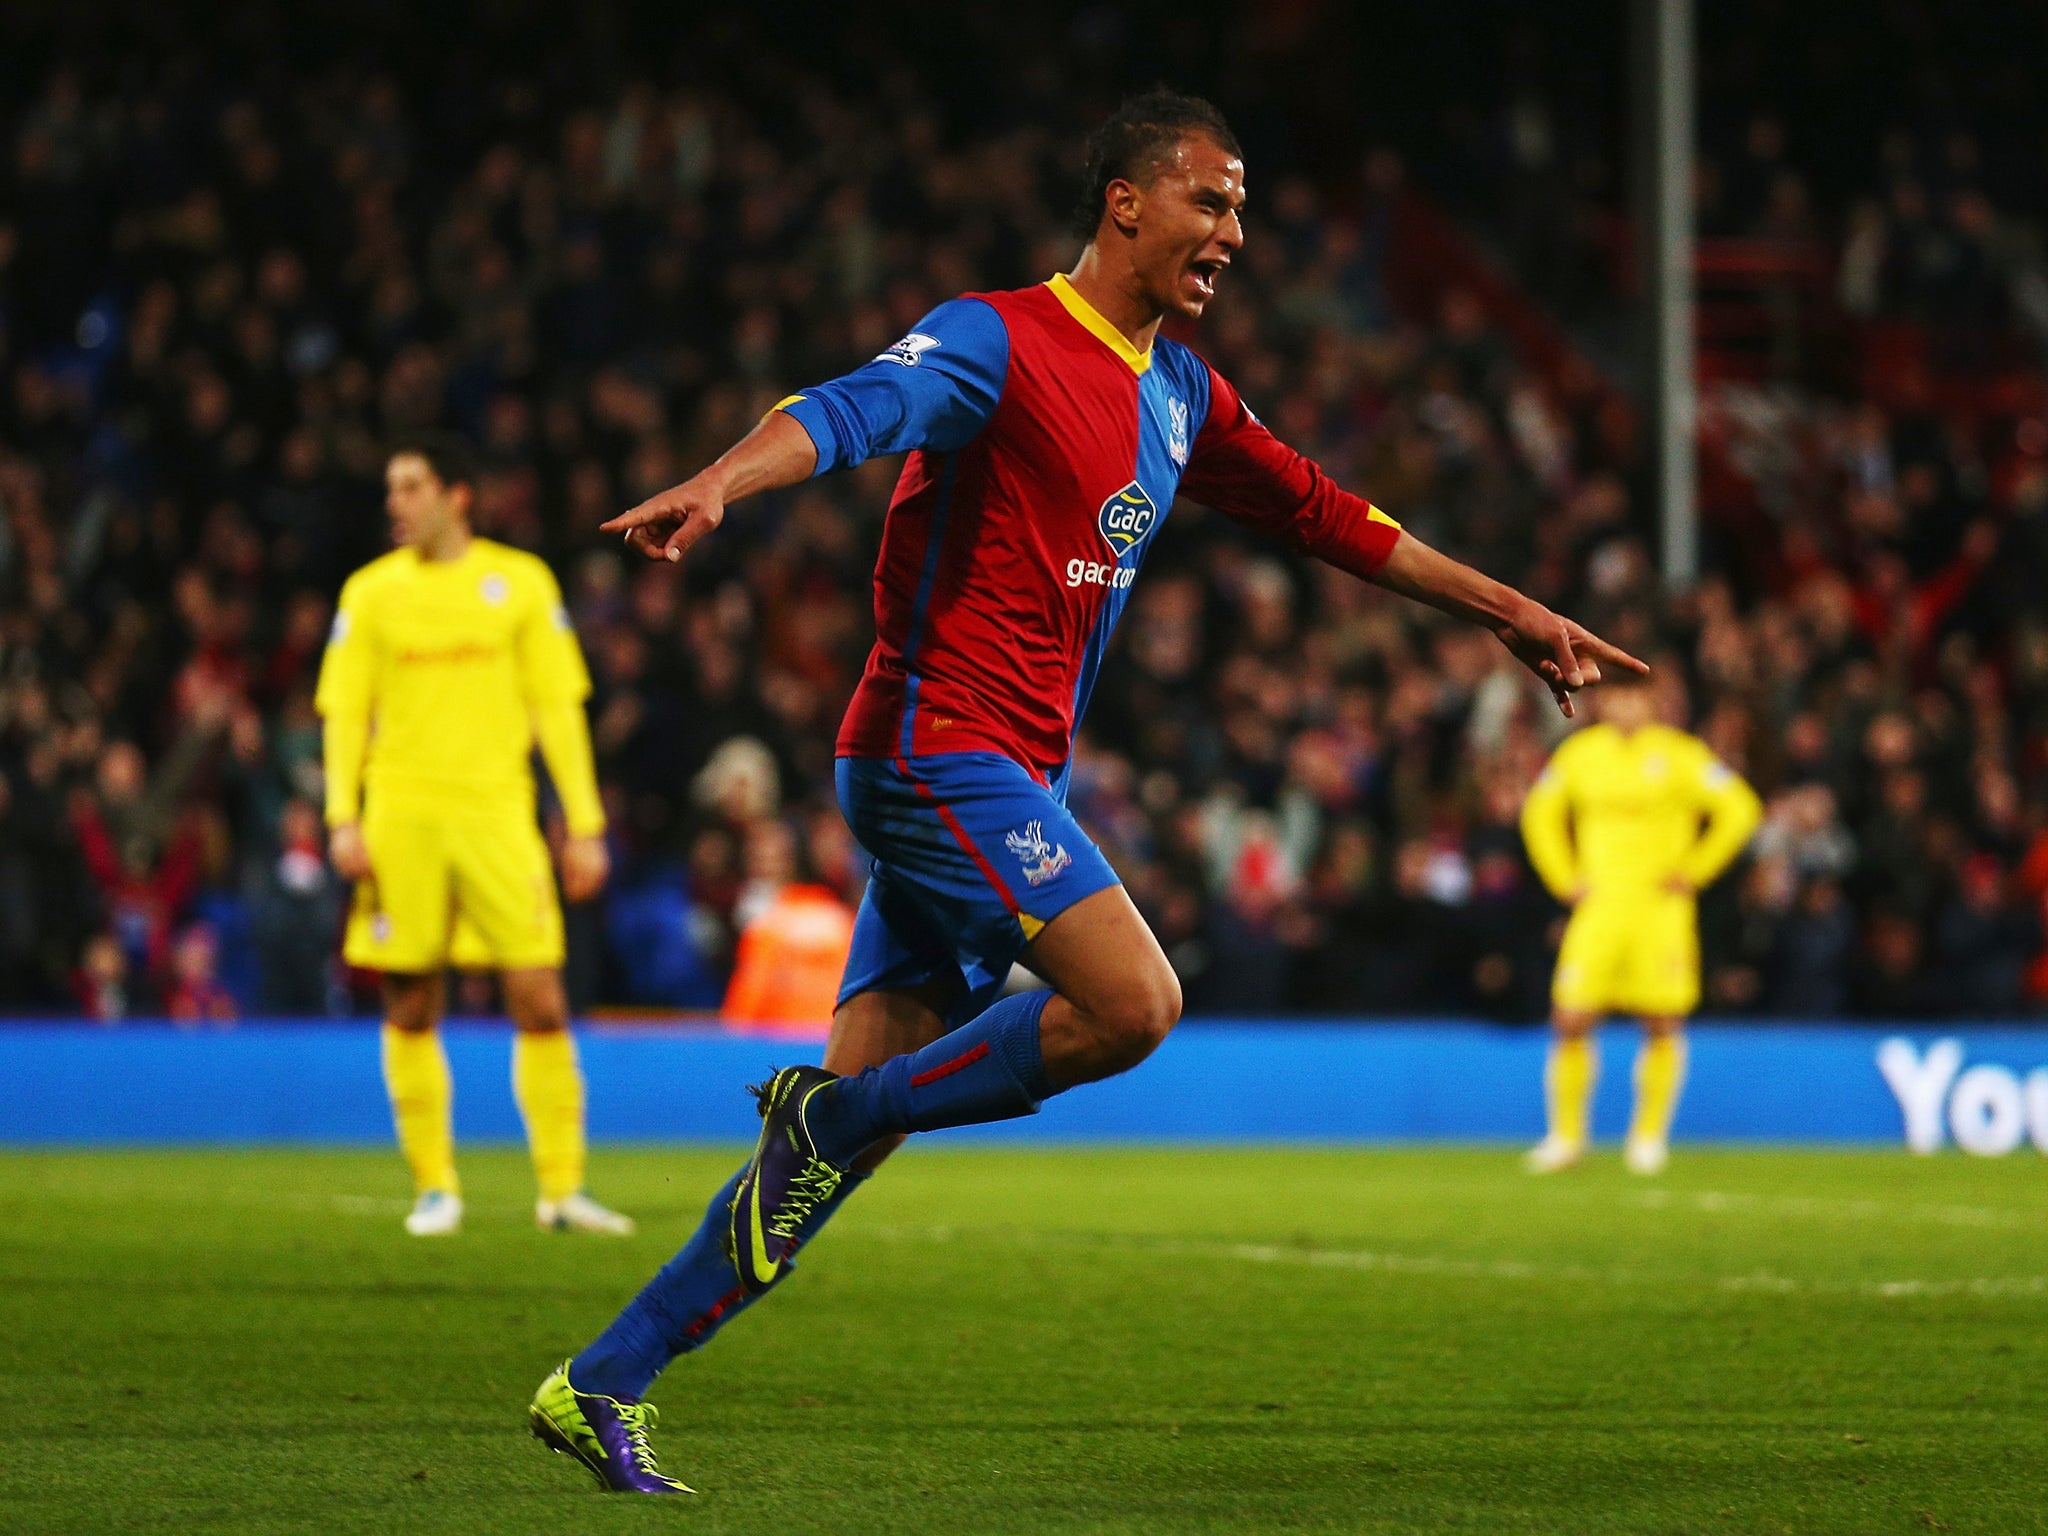 Marouane Chamakh was instrumental in Crystal Palace's survival